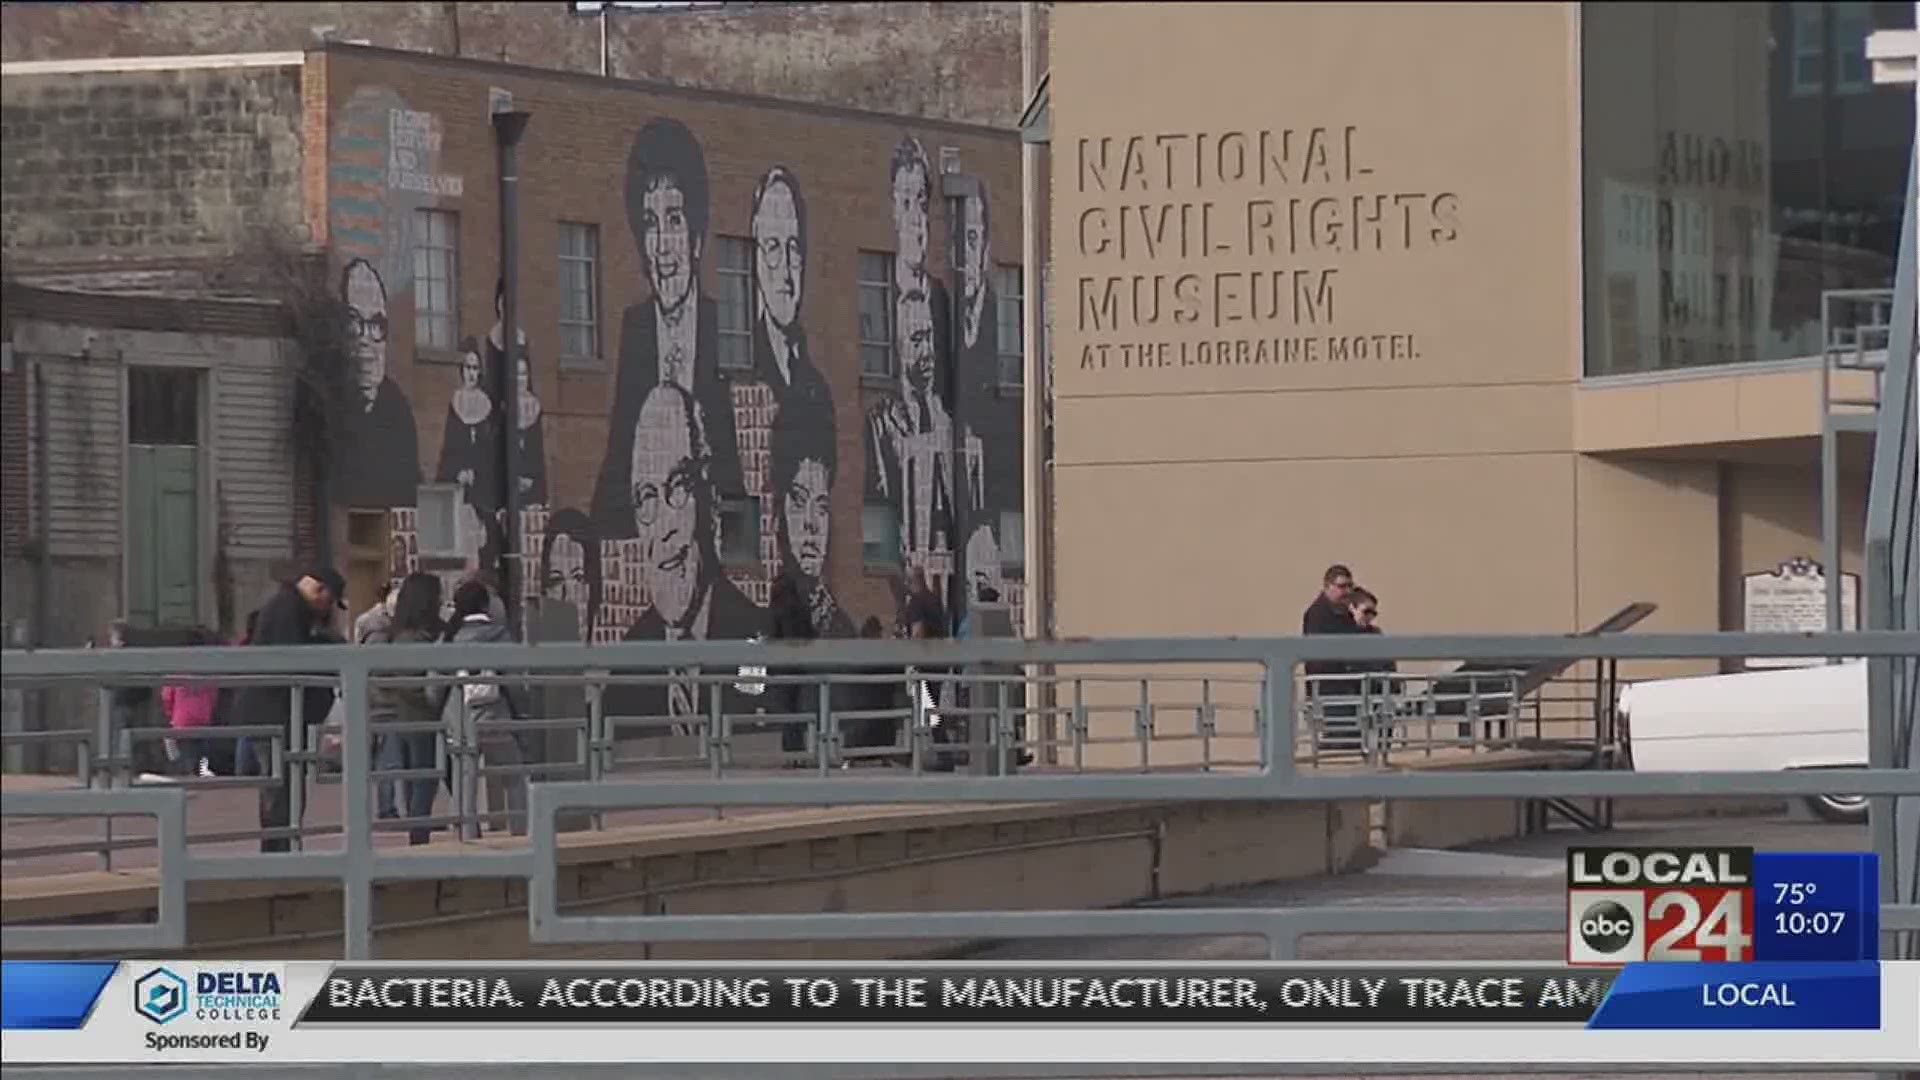 President of the National Civil Rights Museum in downtown Memphis offers perspective on recent protests